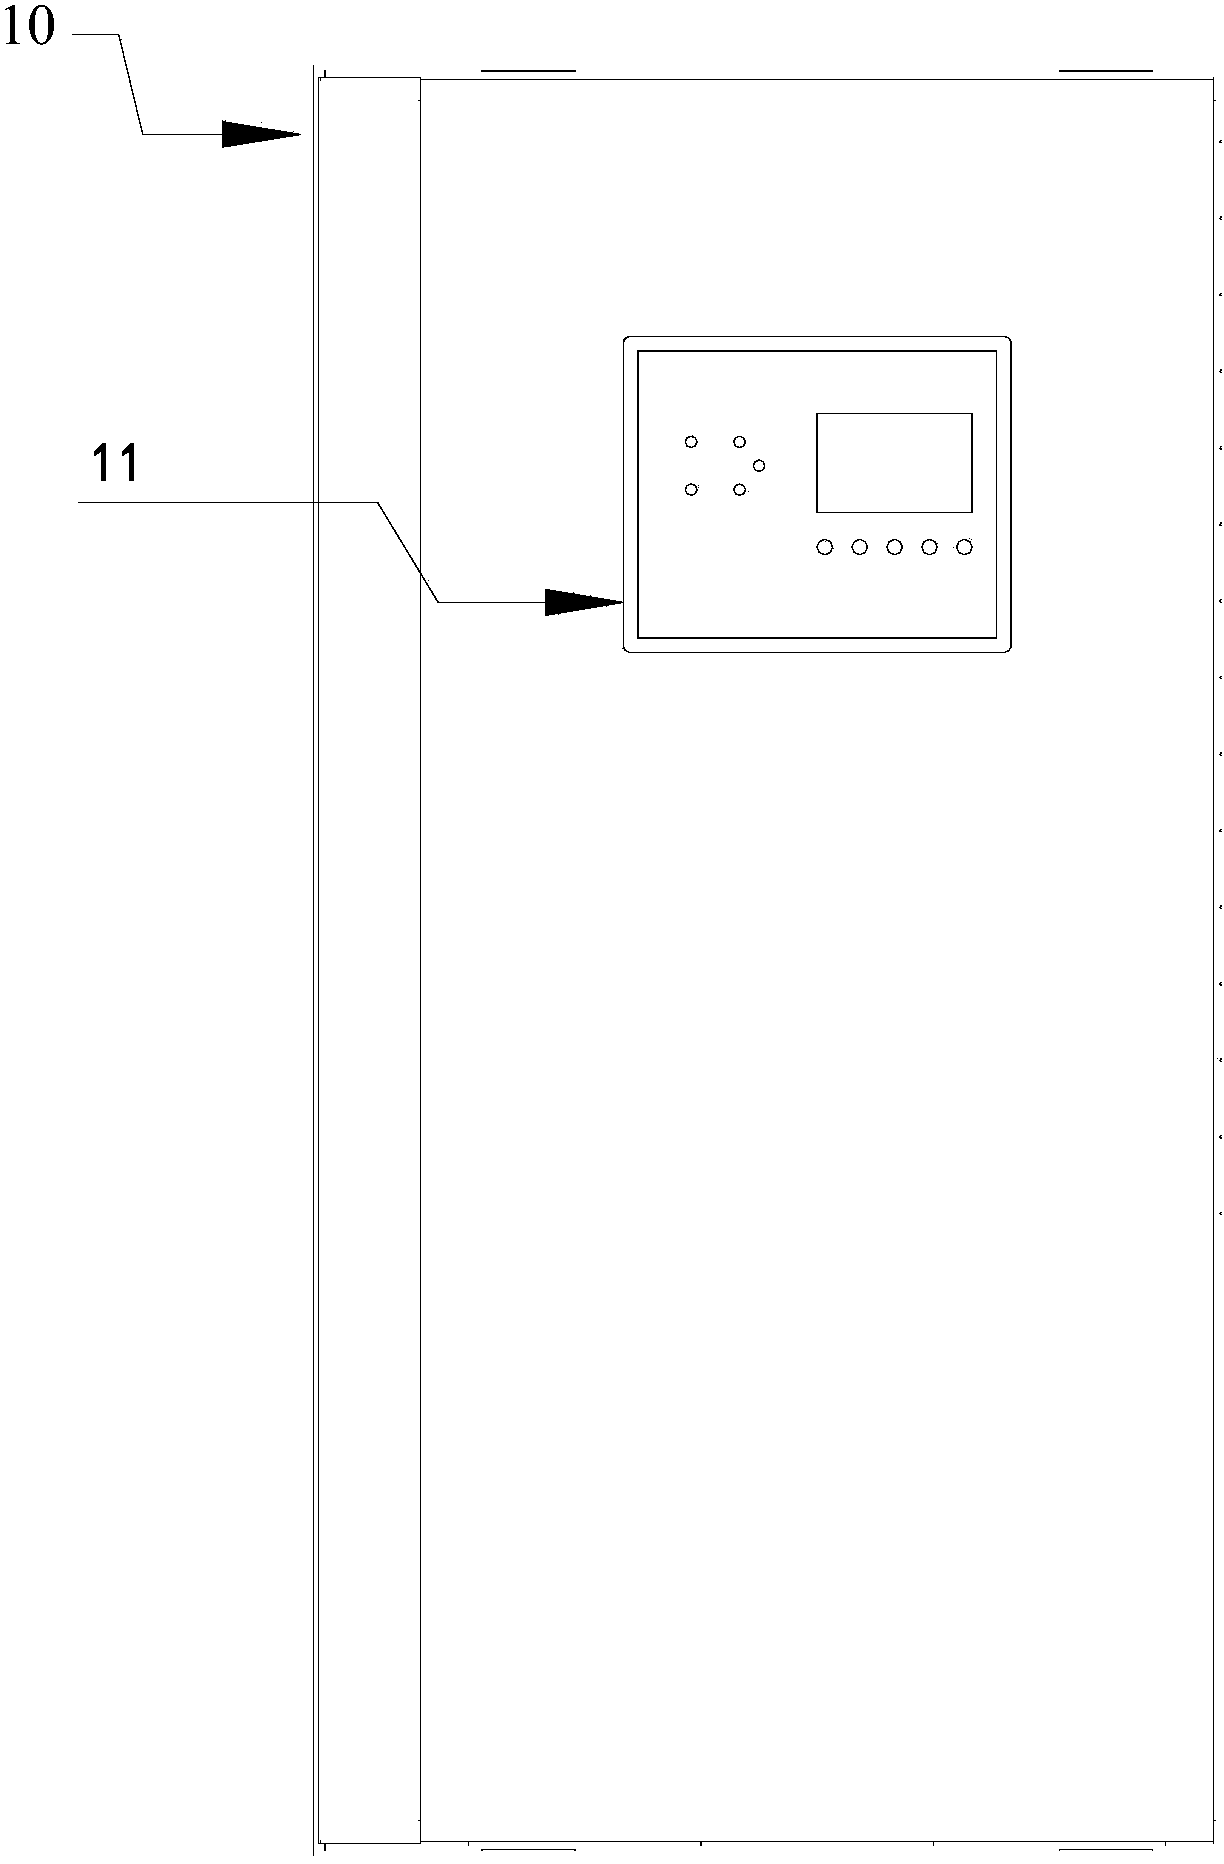 Switching device for achieving switching control over multiple power systems